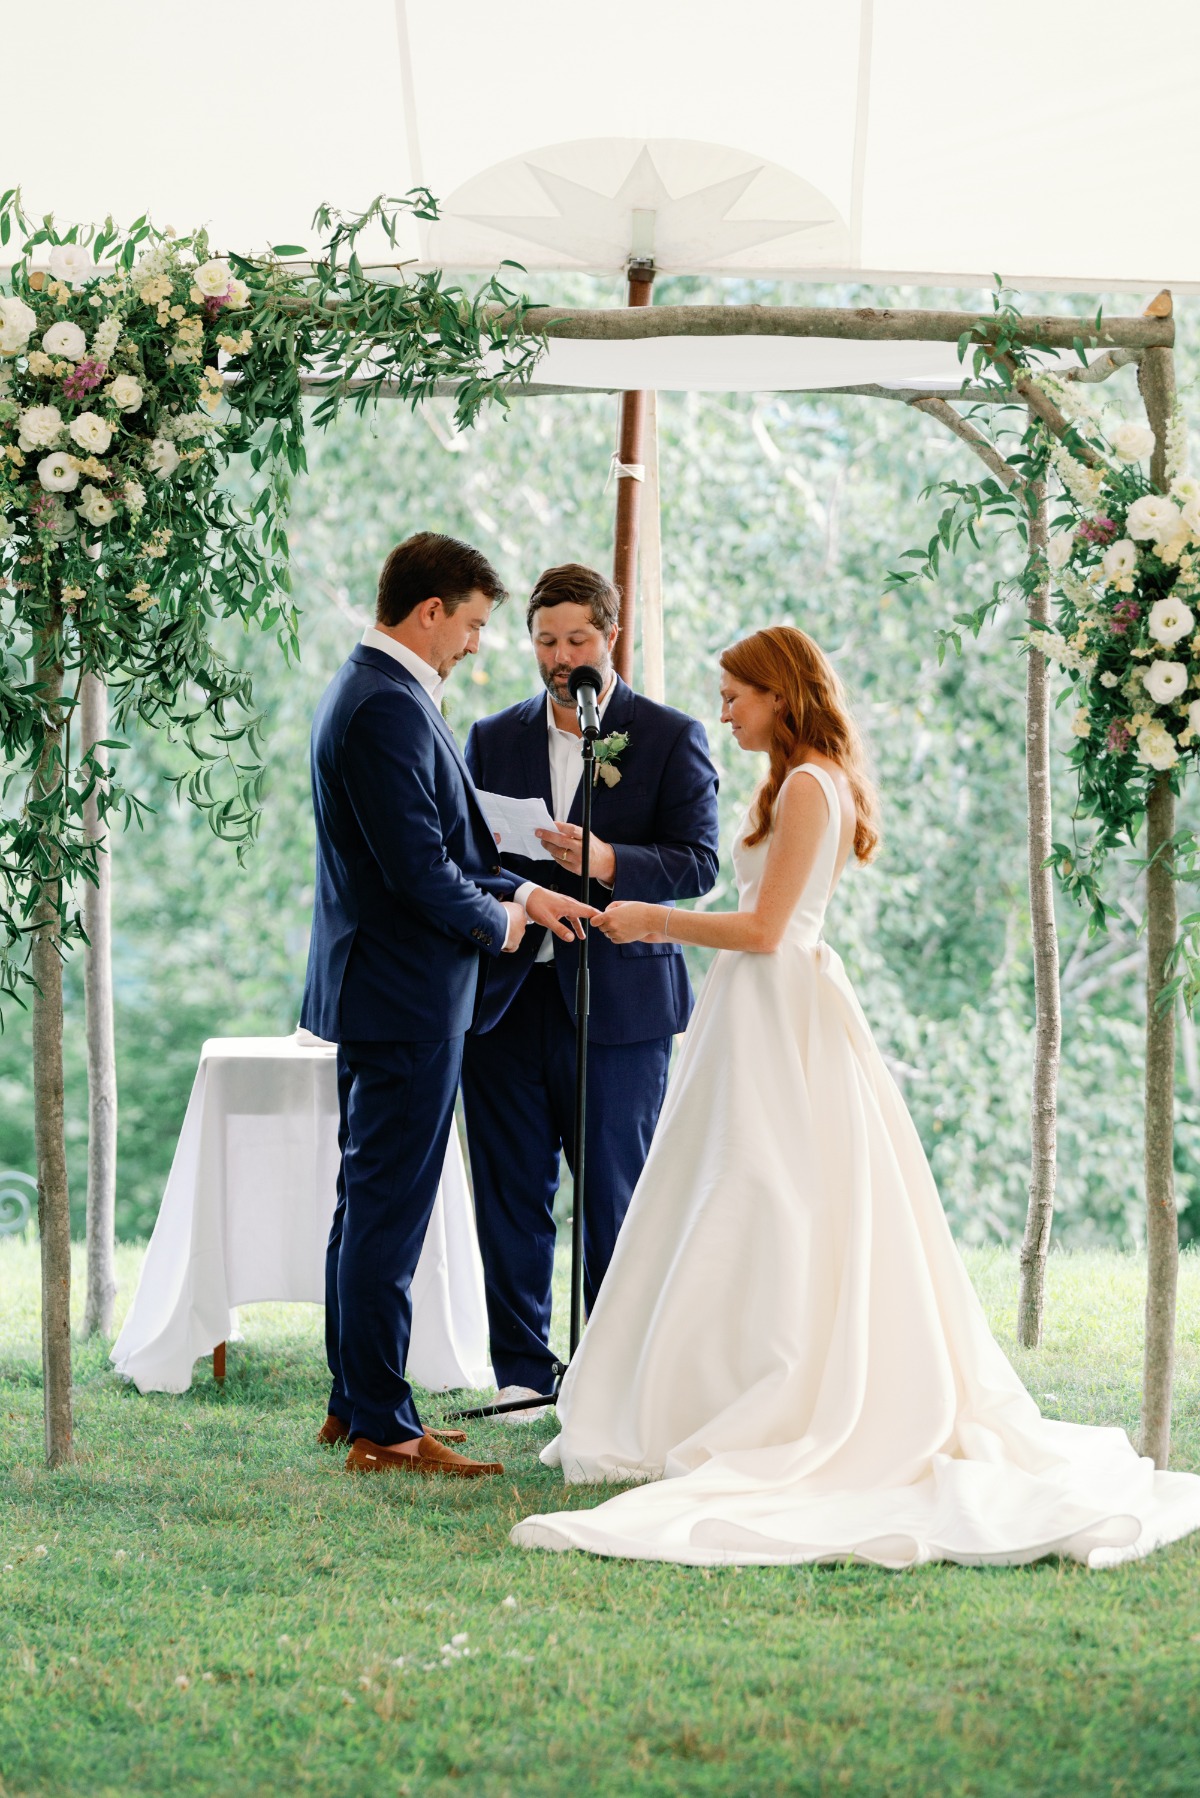 Emotional ceremony under floral chuppah 